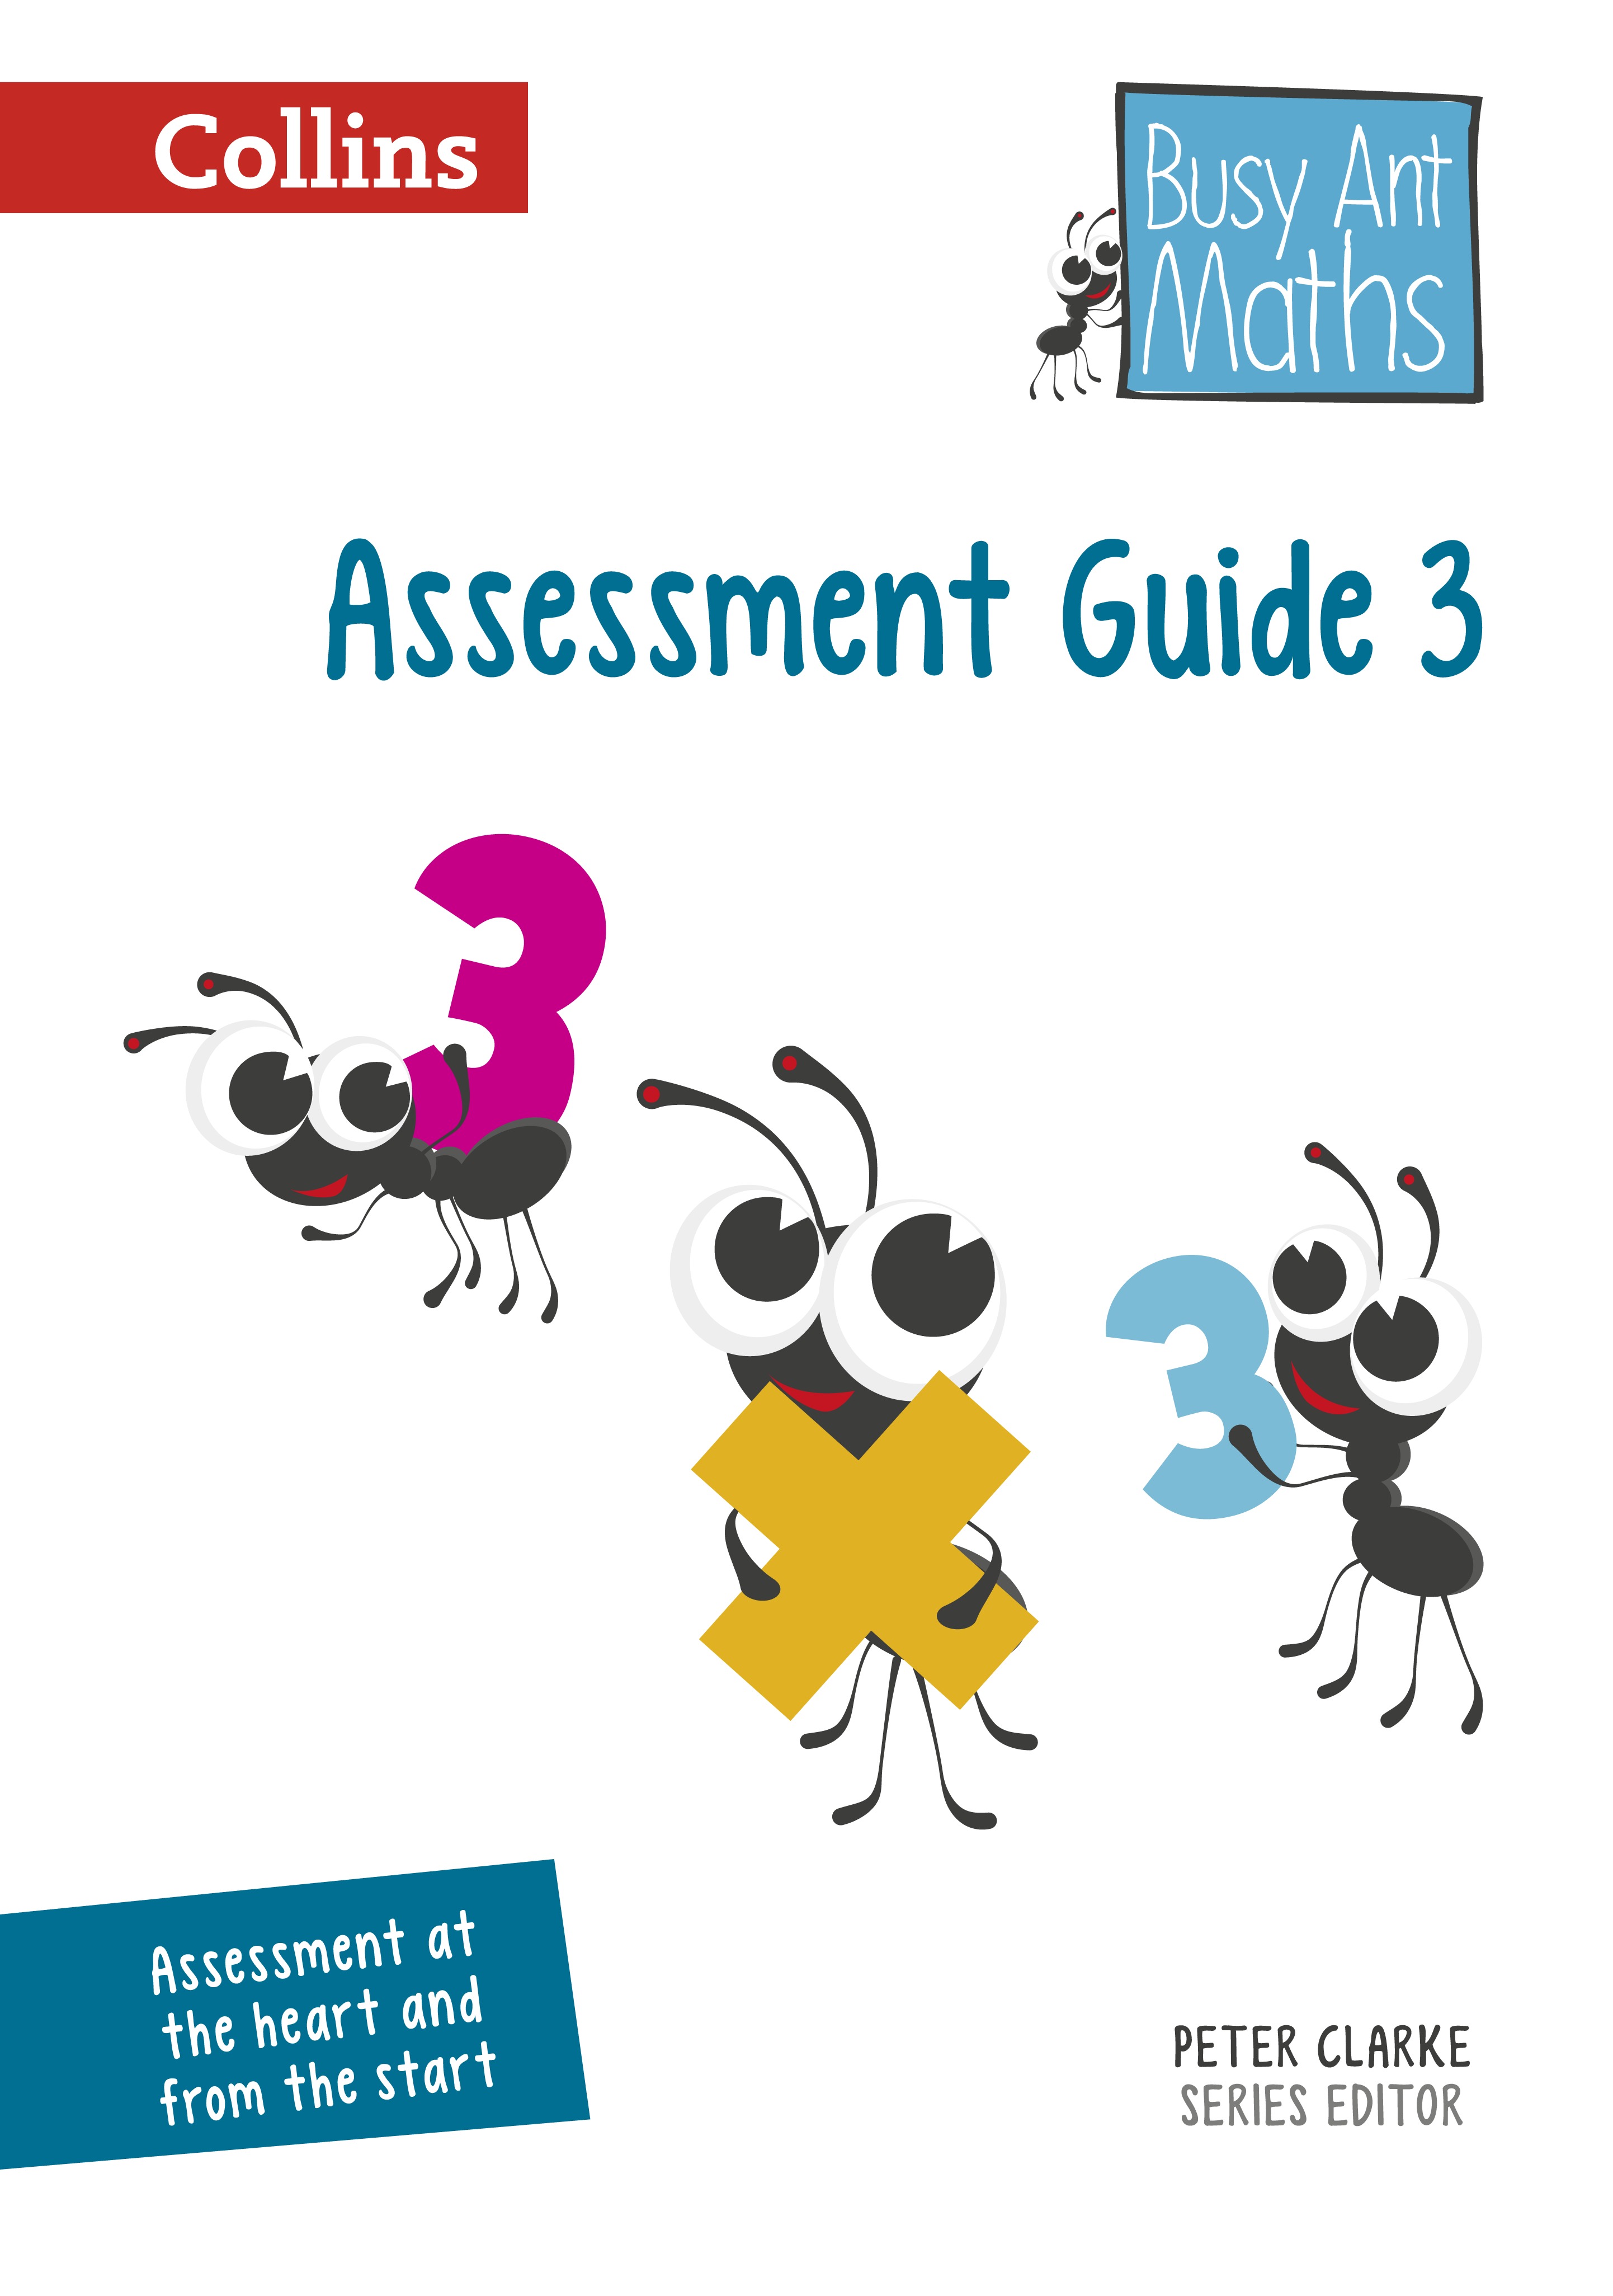 Busy Ant Maths Assessment Guide 3